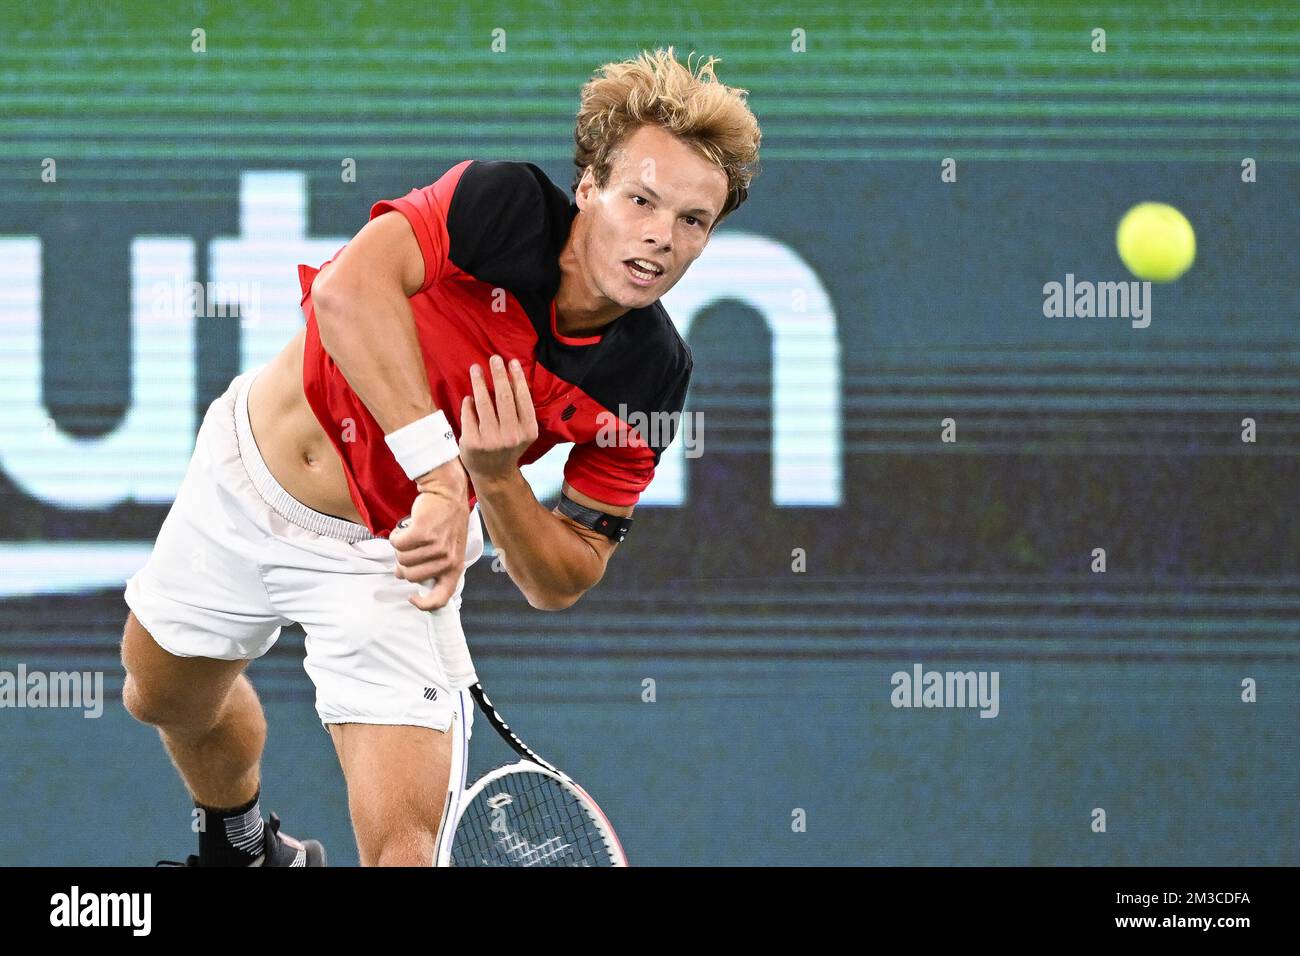 Belgian Michael Geerts pictured in action during a training session of the Belgian team ahead of the group stage of the 2022 Davis Cup finals, Monday 12 September 2022, in Hamburg, Germany.